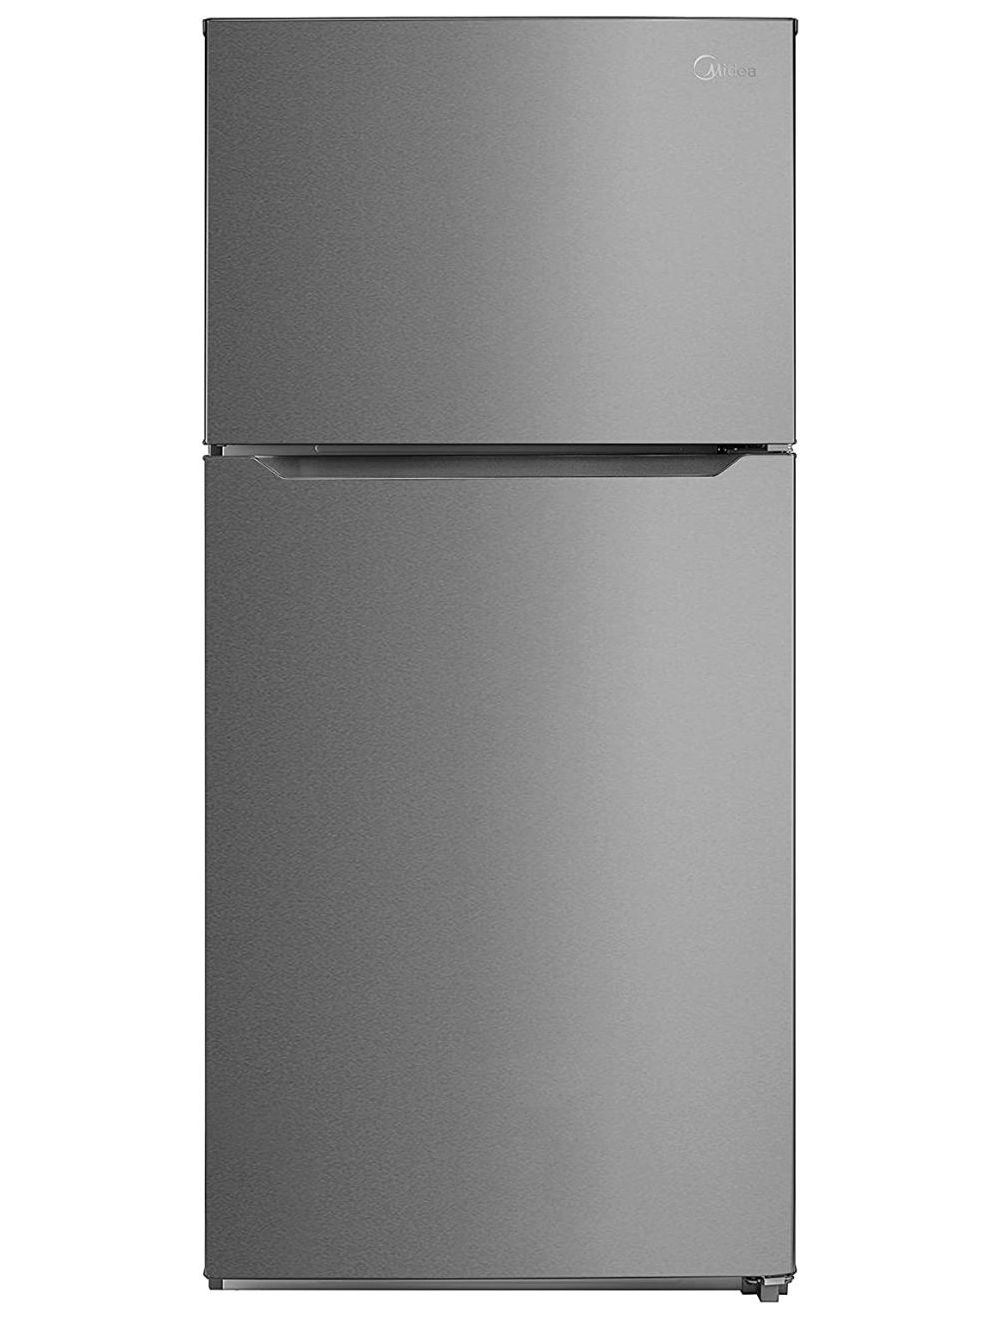 Midea  Refrigerator Stainless Steel Finish 650L Net Capacity-HD845FWES